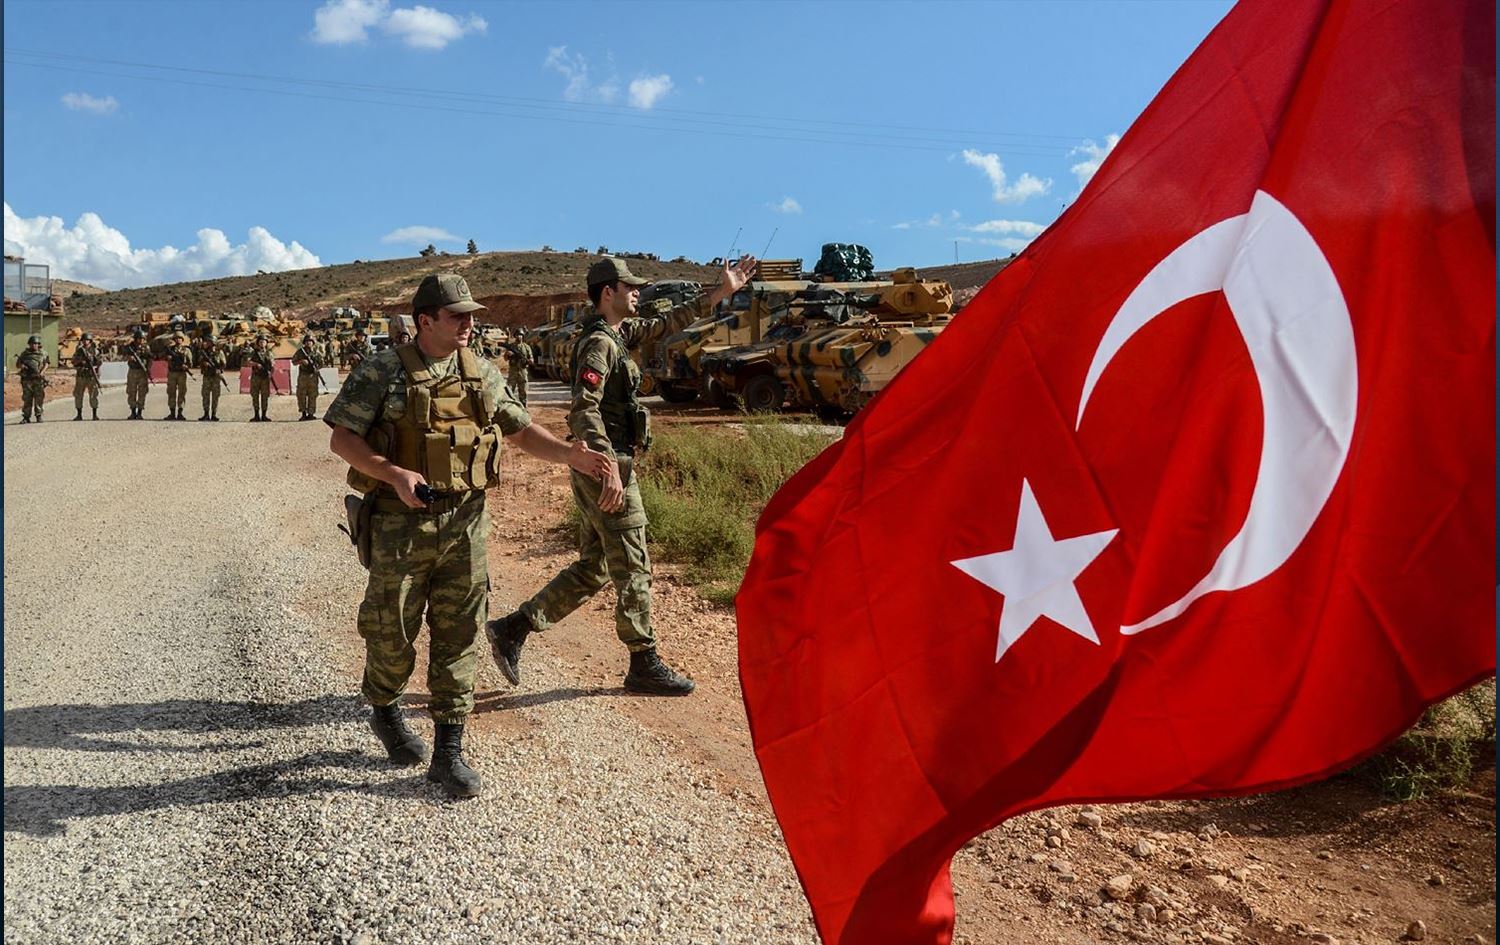 Turkish soldiers with the Turkish flag flying